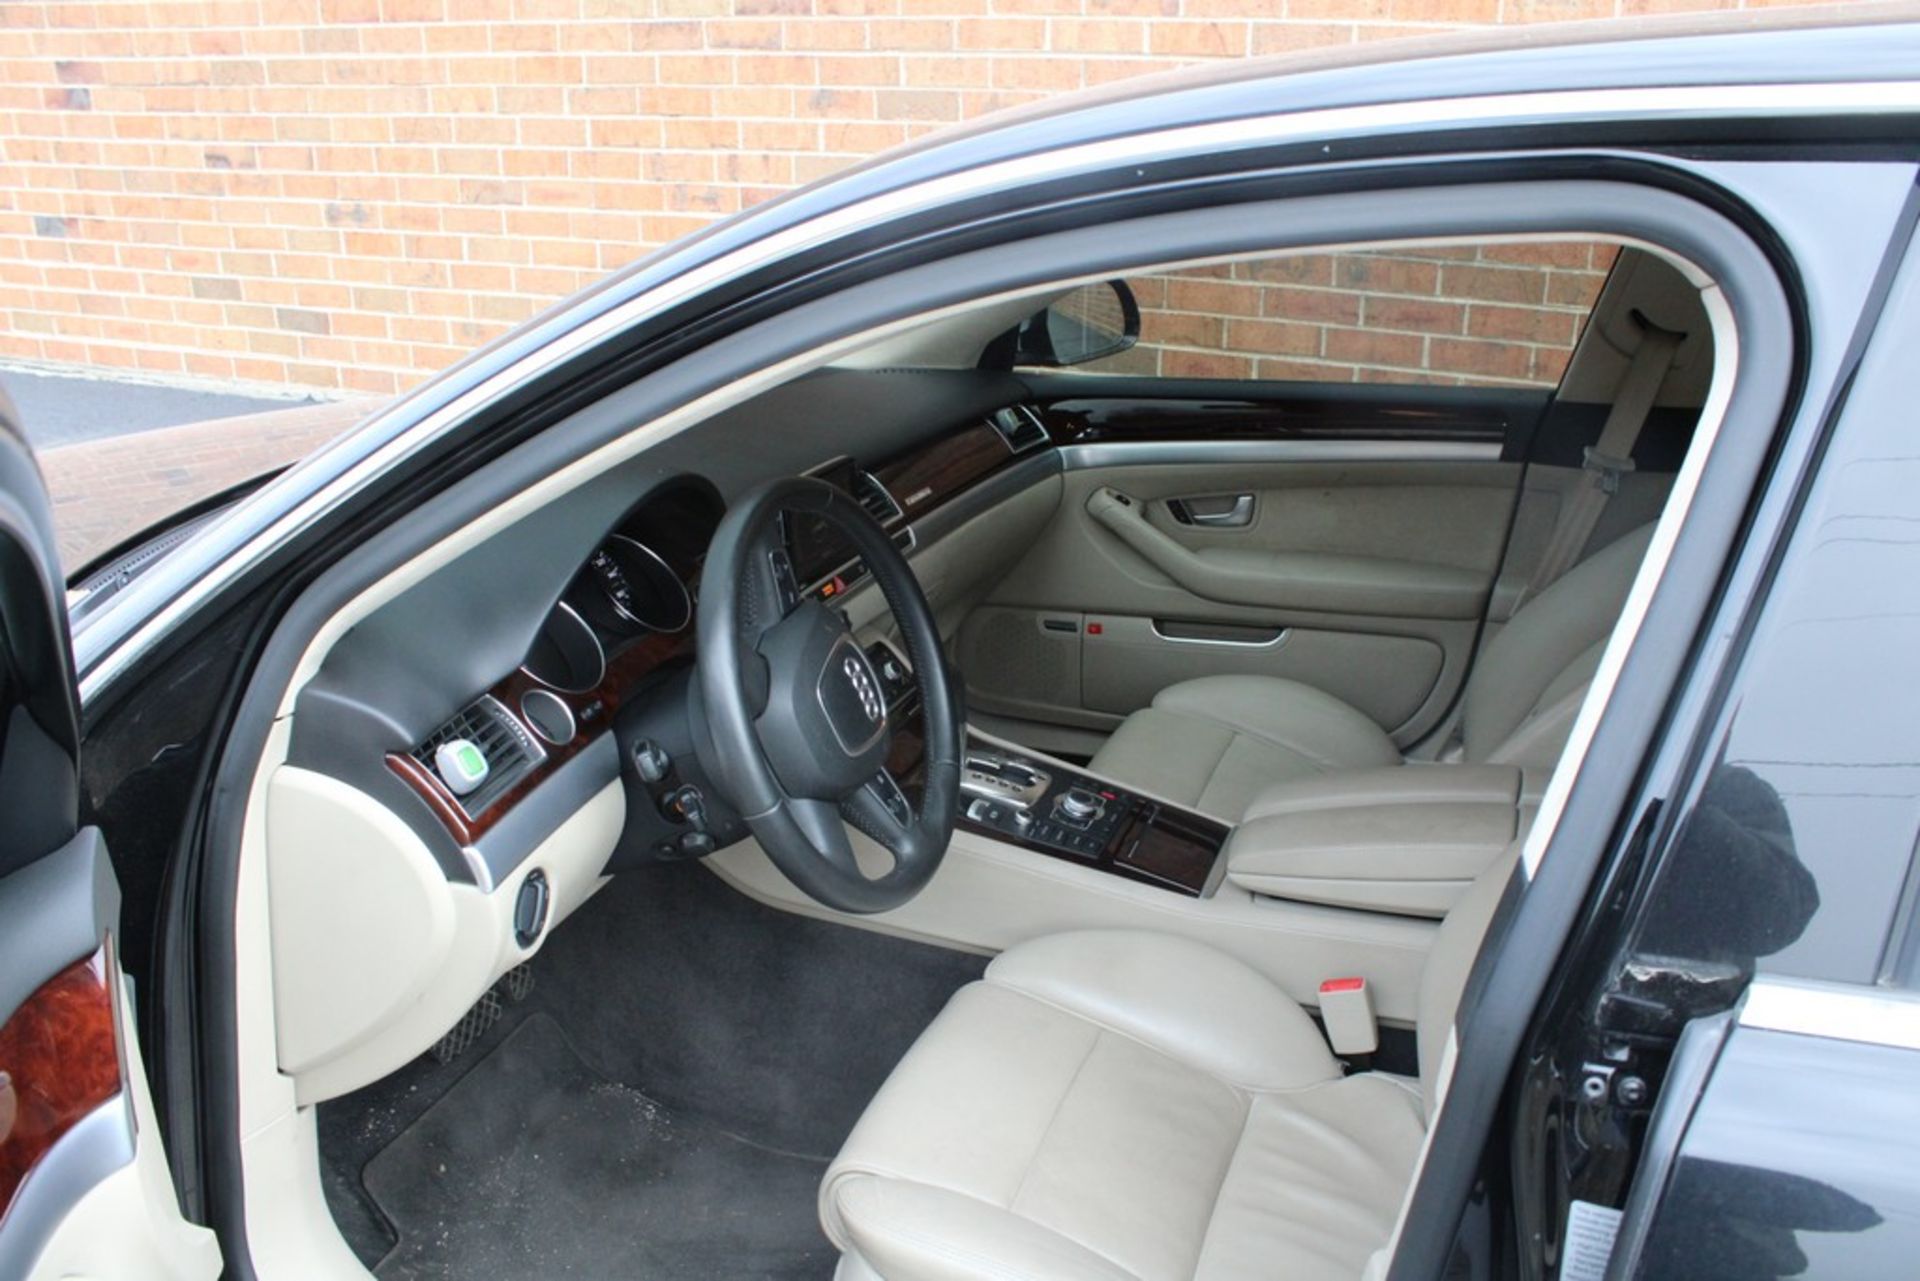 2008 AUDI A8 L, 4.2L V-8, LEATHER INTERIOR, SUN ROOF, VIN WAUMV94E28N016337, 89,975 MILES SHOWN ON - Image 6 of 11